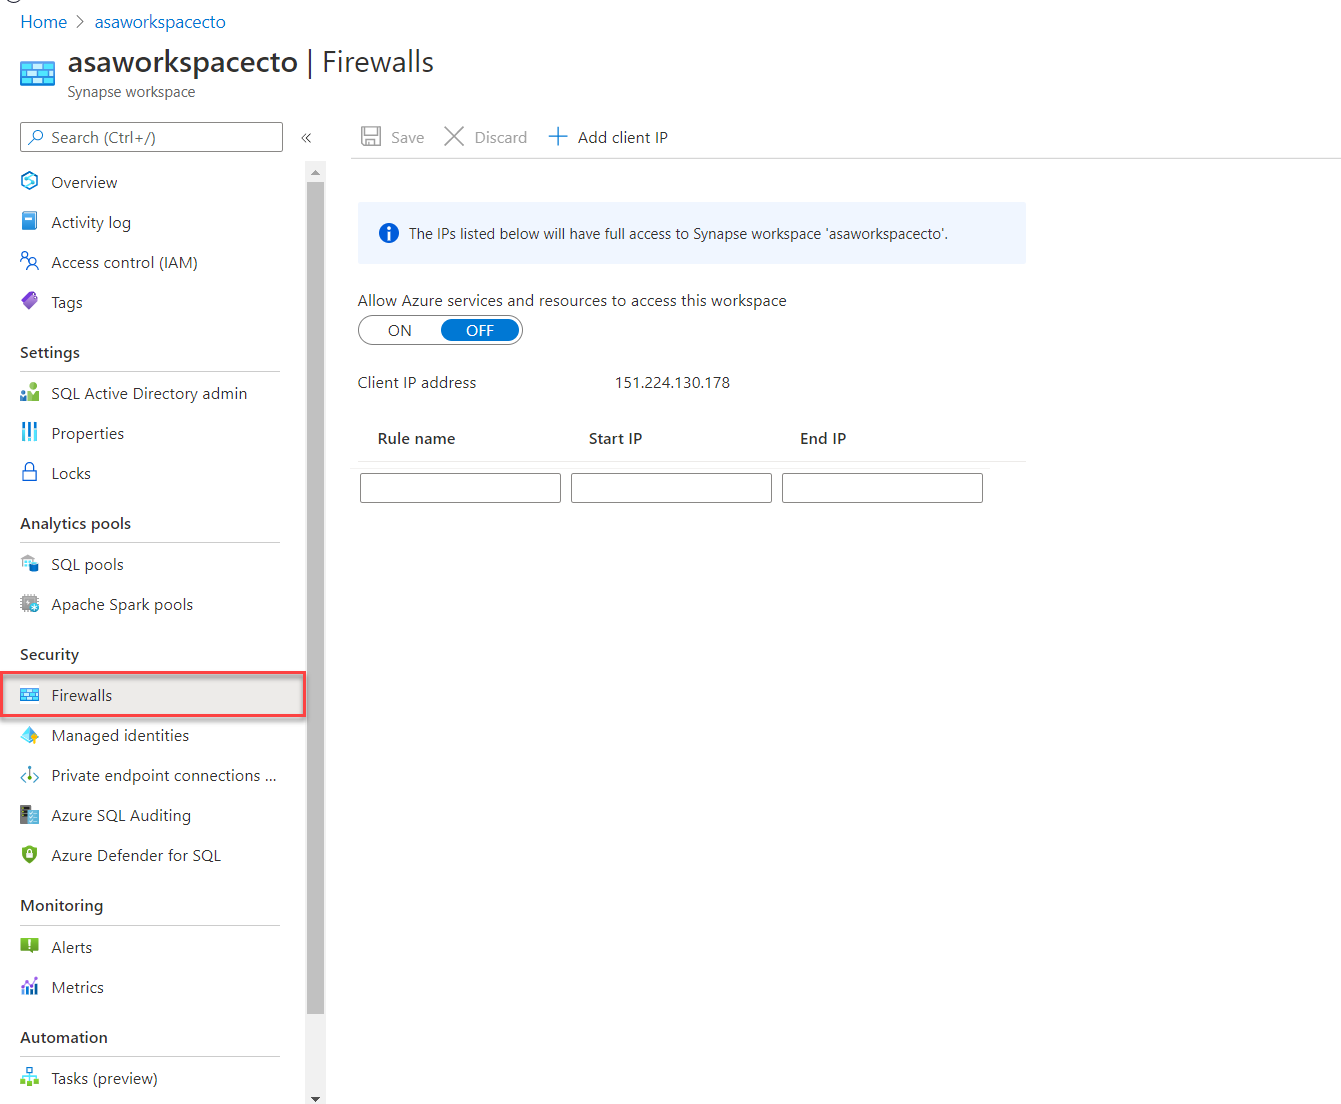 Configuring firewall settings in the Azure portal.